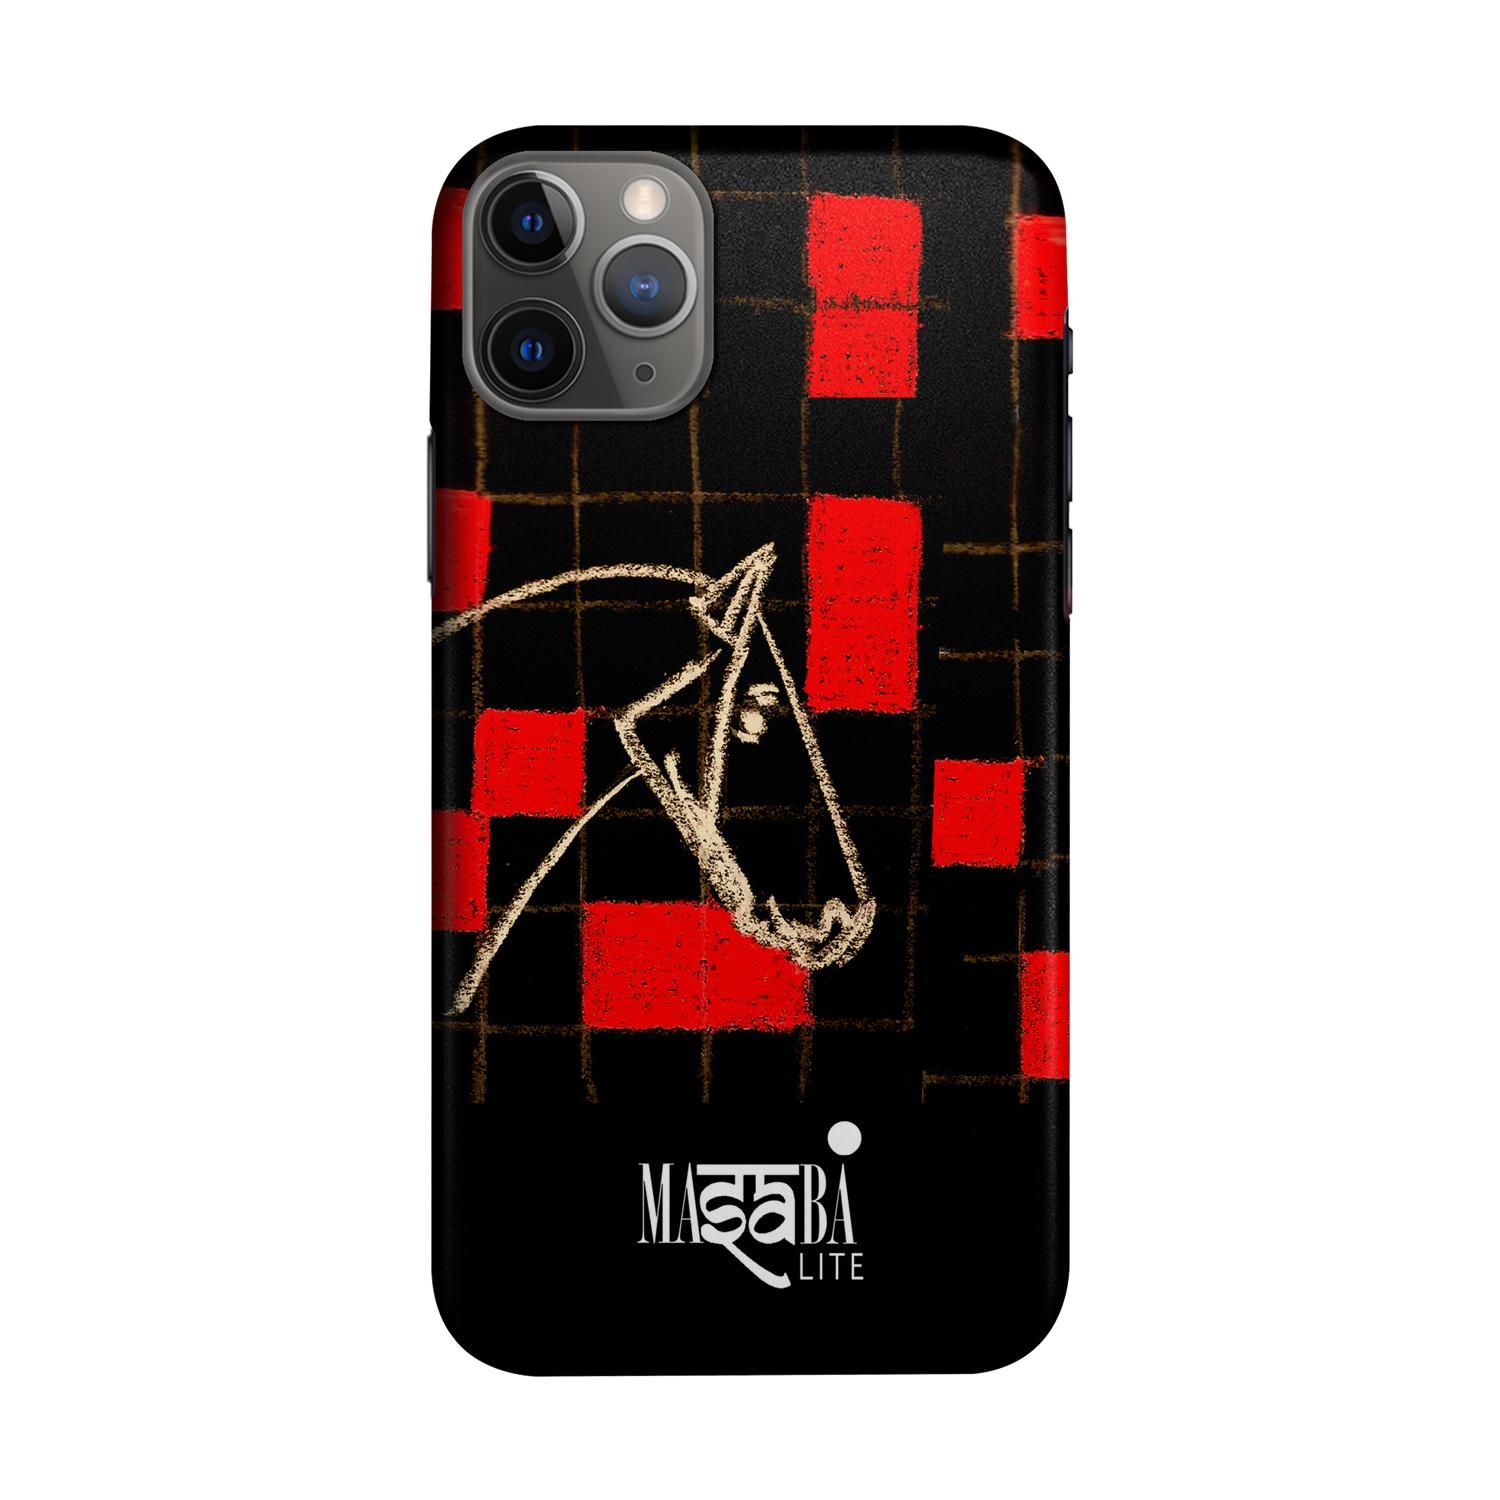 Masaba Red Checkered Horse - Sleek Phone Case for iPhone 11 Pro Max